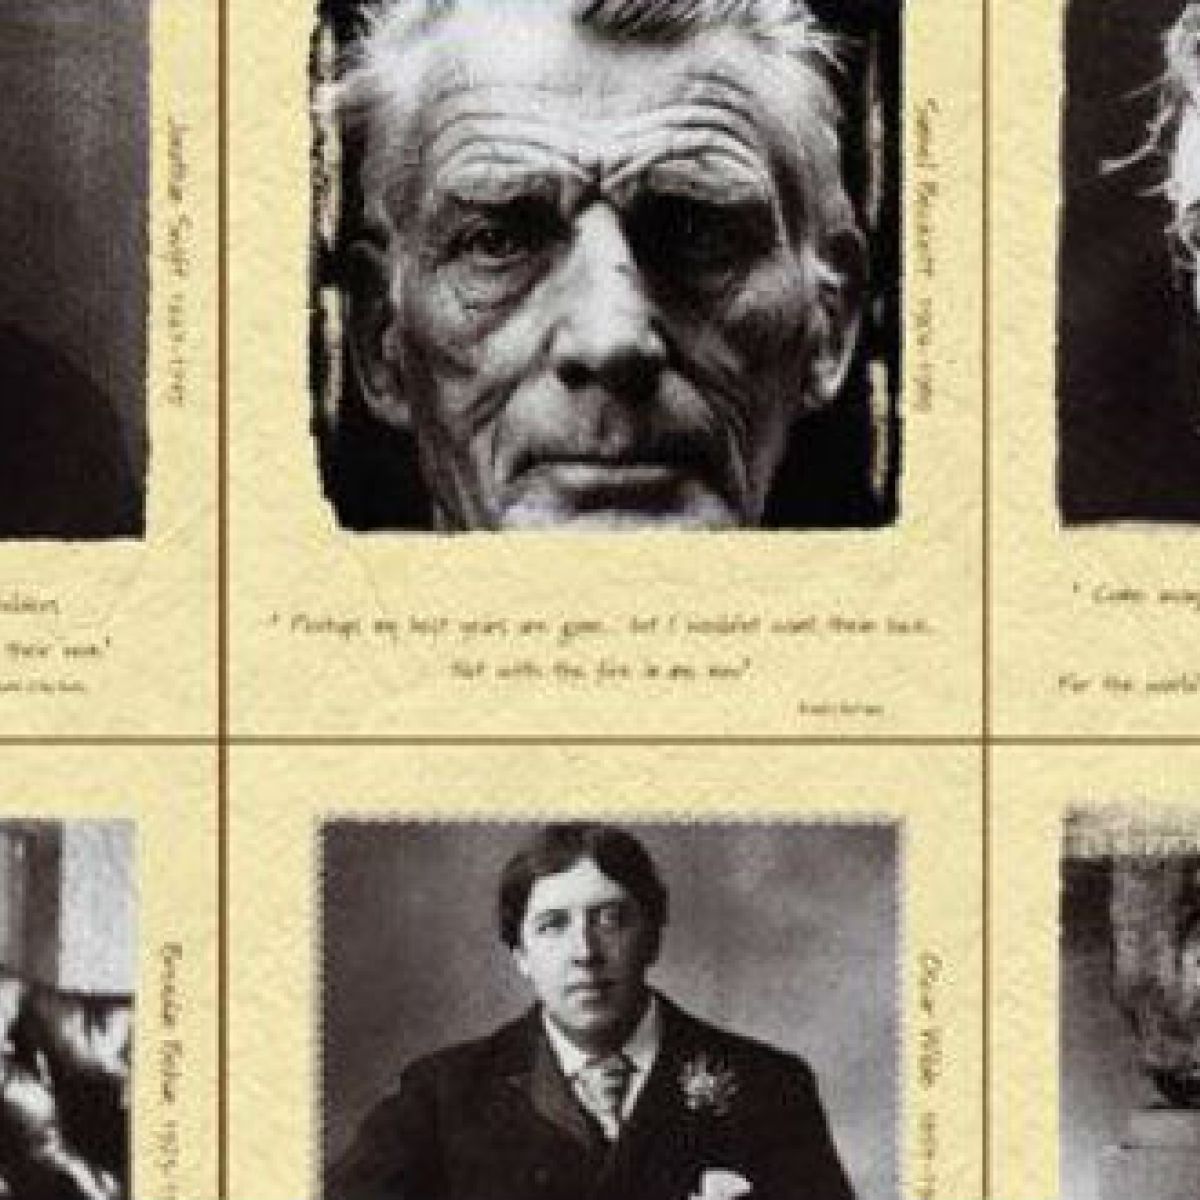 Twelve Irish writers, supposedly our greatest, and not a vagina